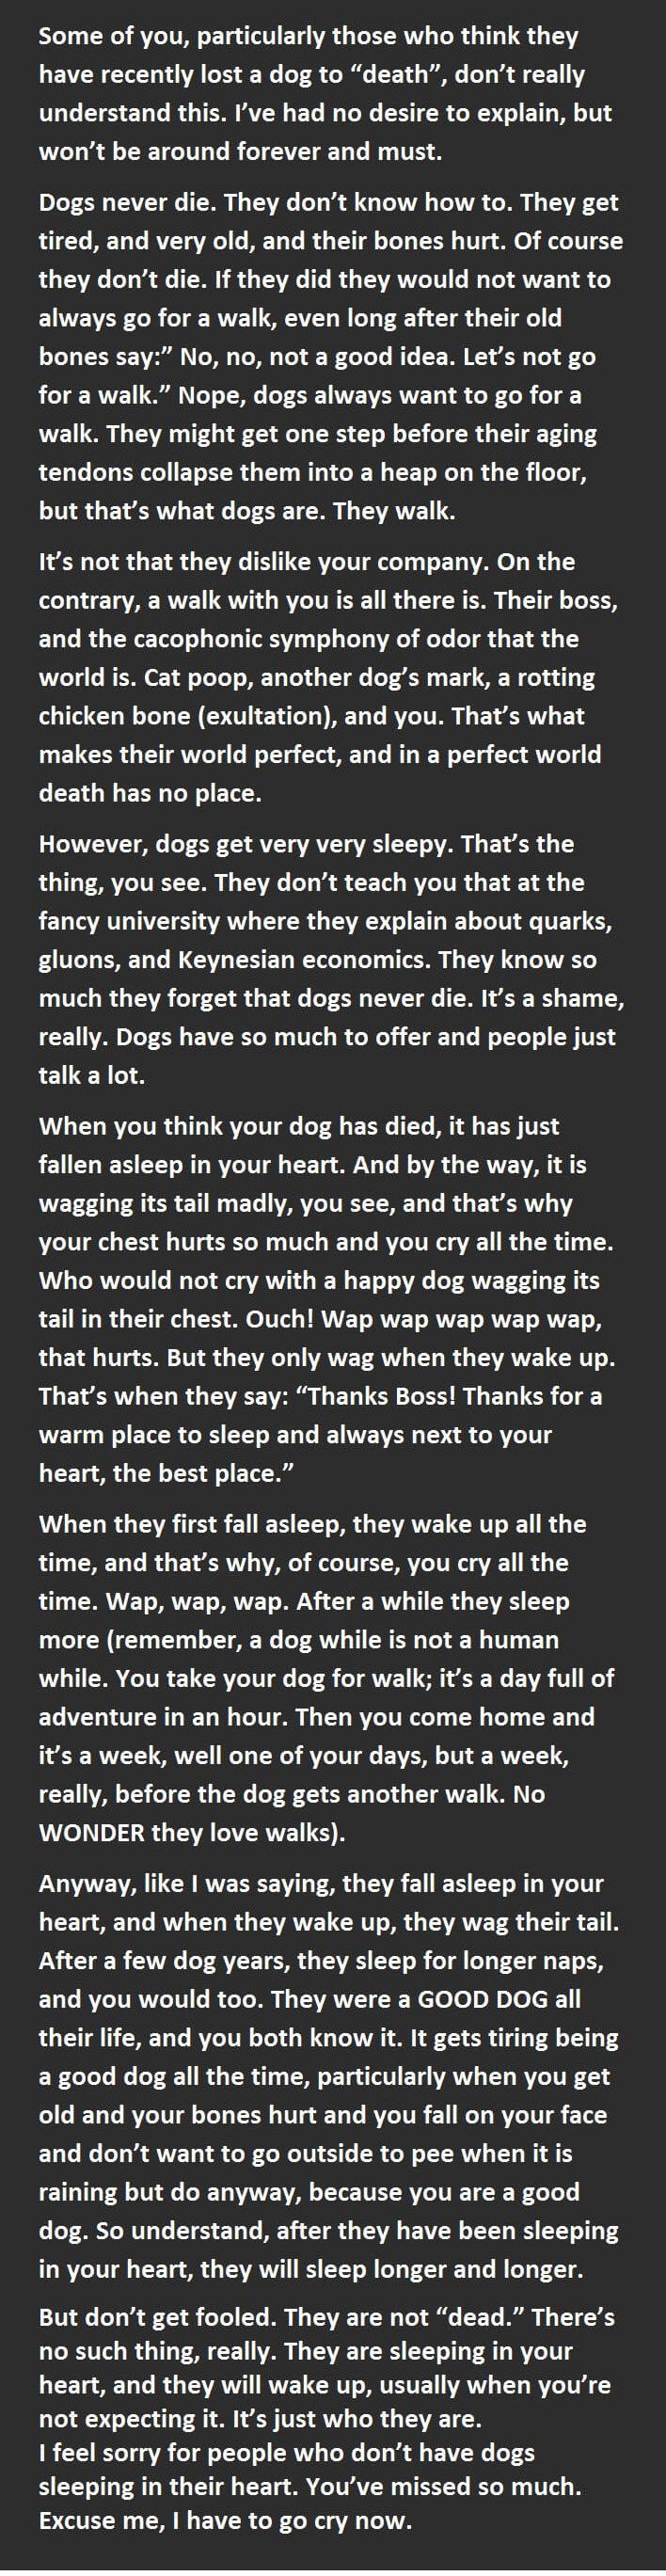 dogs never die